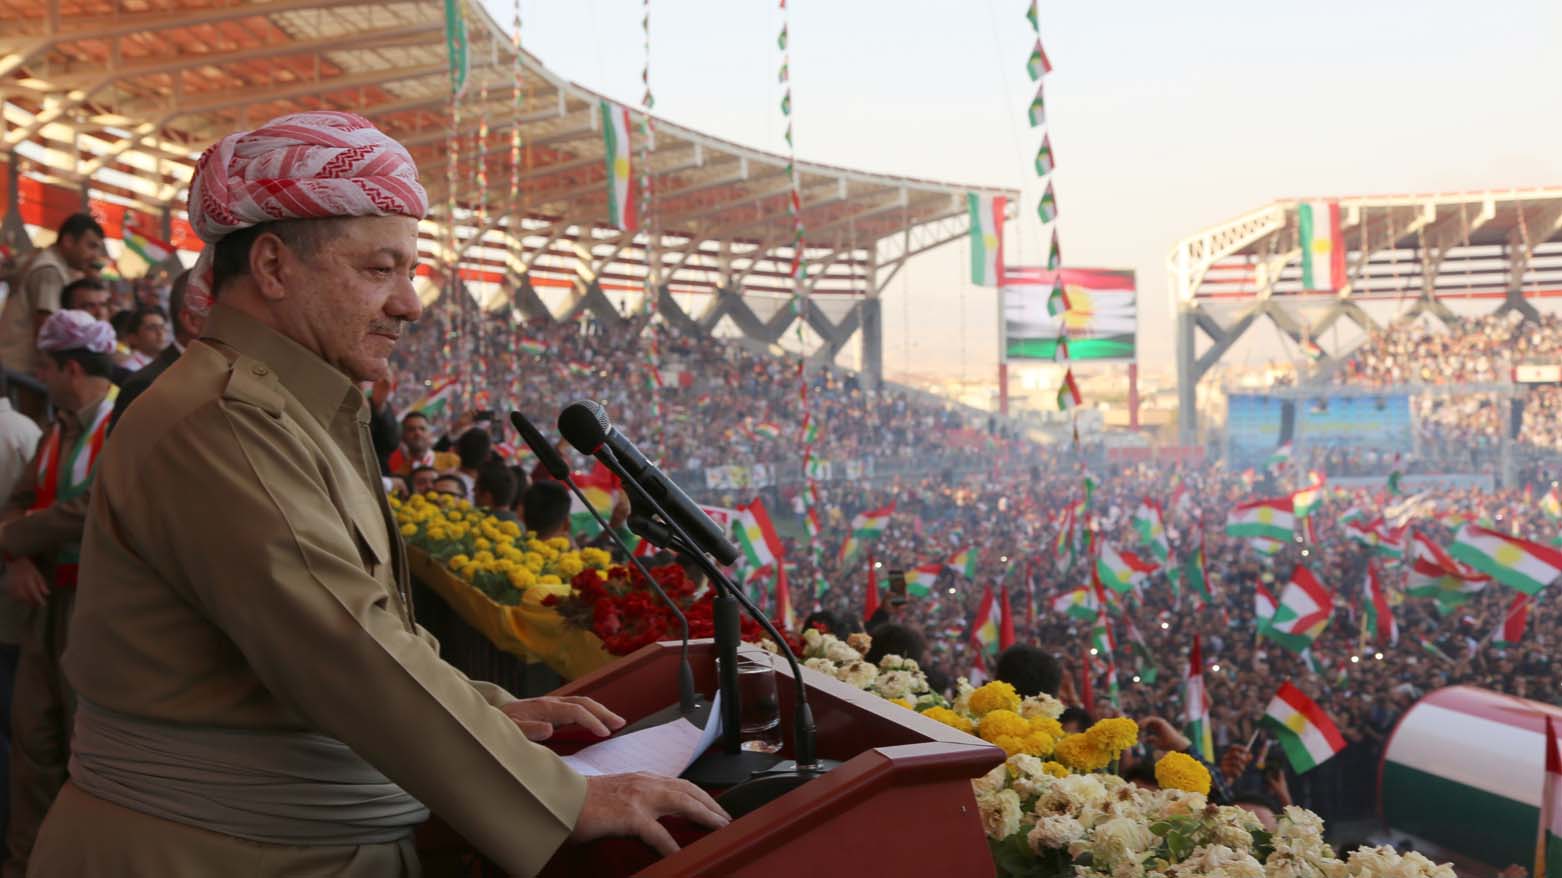 Former Kurdistan Region president and current Kurdistan Democratic Party (KDP) President Masoud Barzani delivering remarks at rally for independence referendum in 2017. (Photo: Barzani Headquarters)